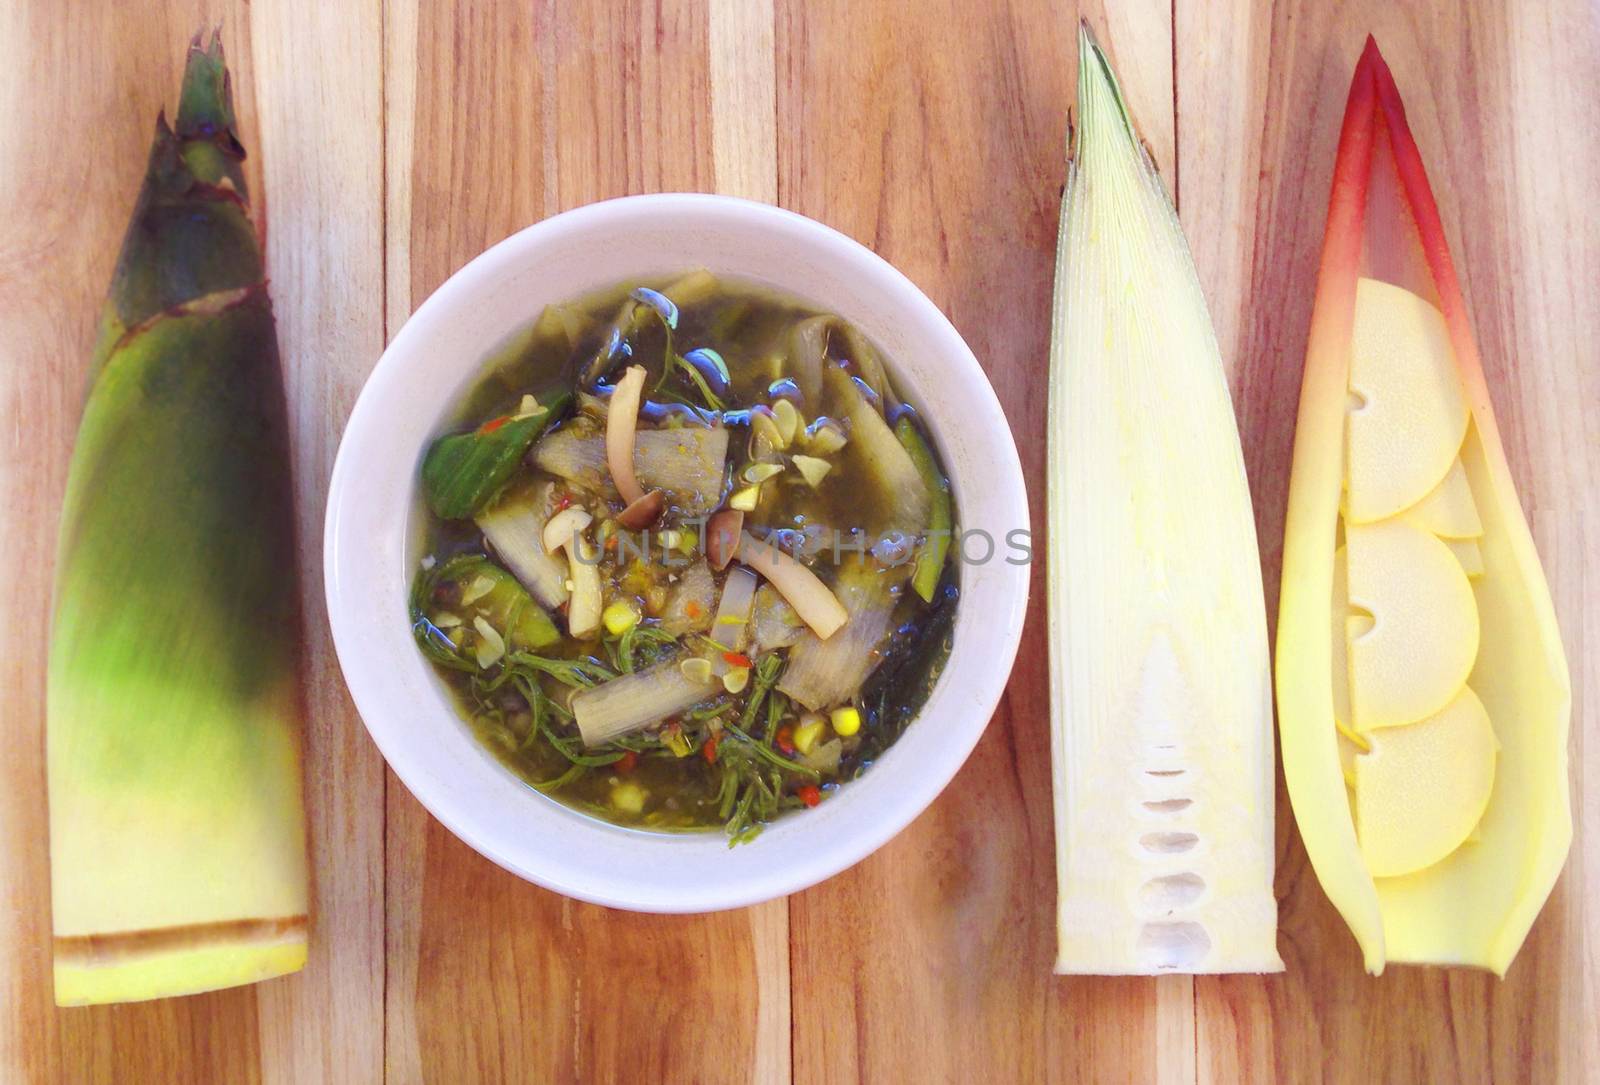 Bamboo shoots Thai soup curry by Bowonpat